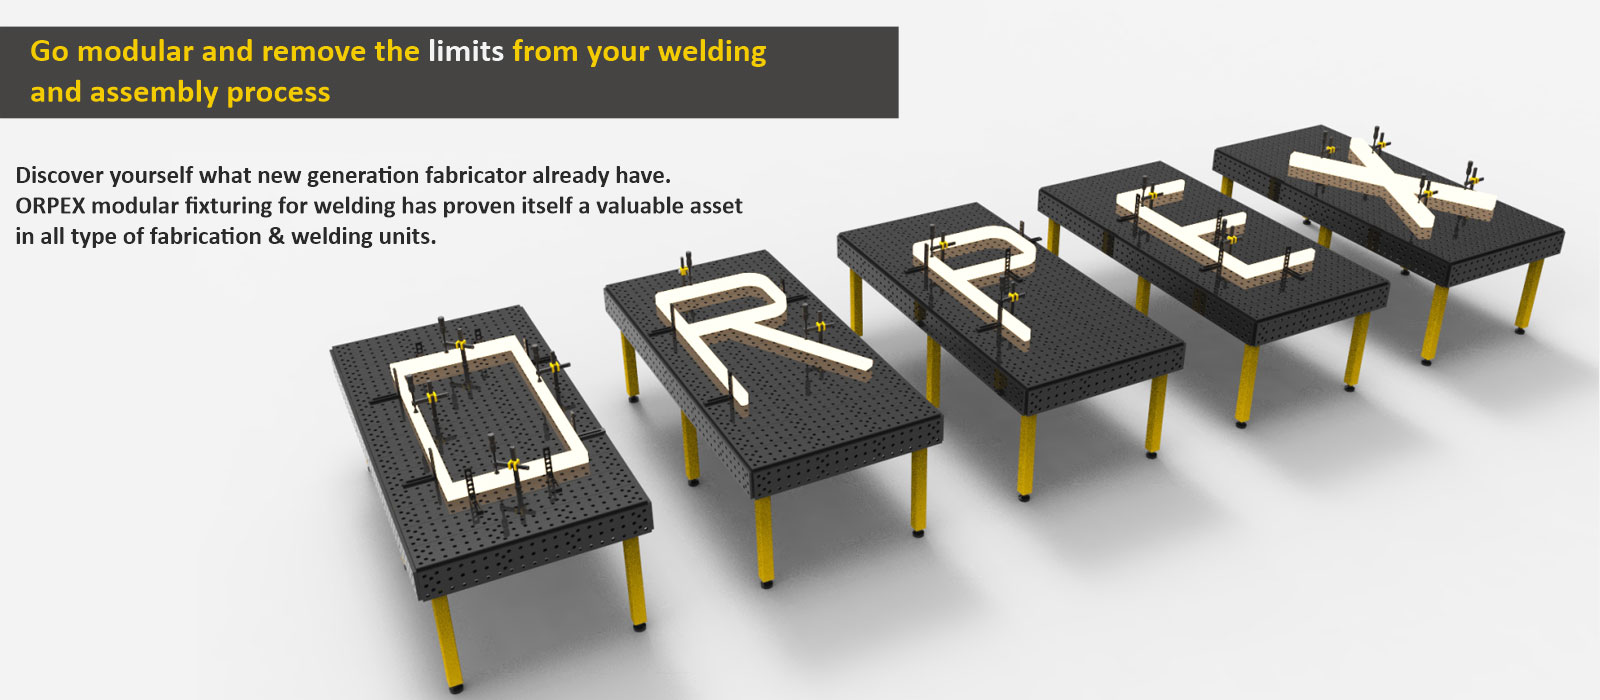 Hero Slider Image 2 | Go modular and remove the limits from your welding and assembly process.